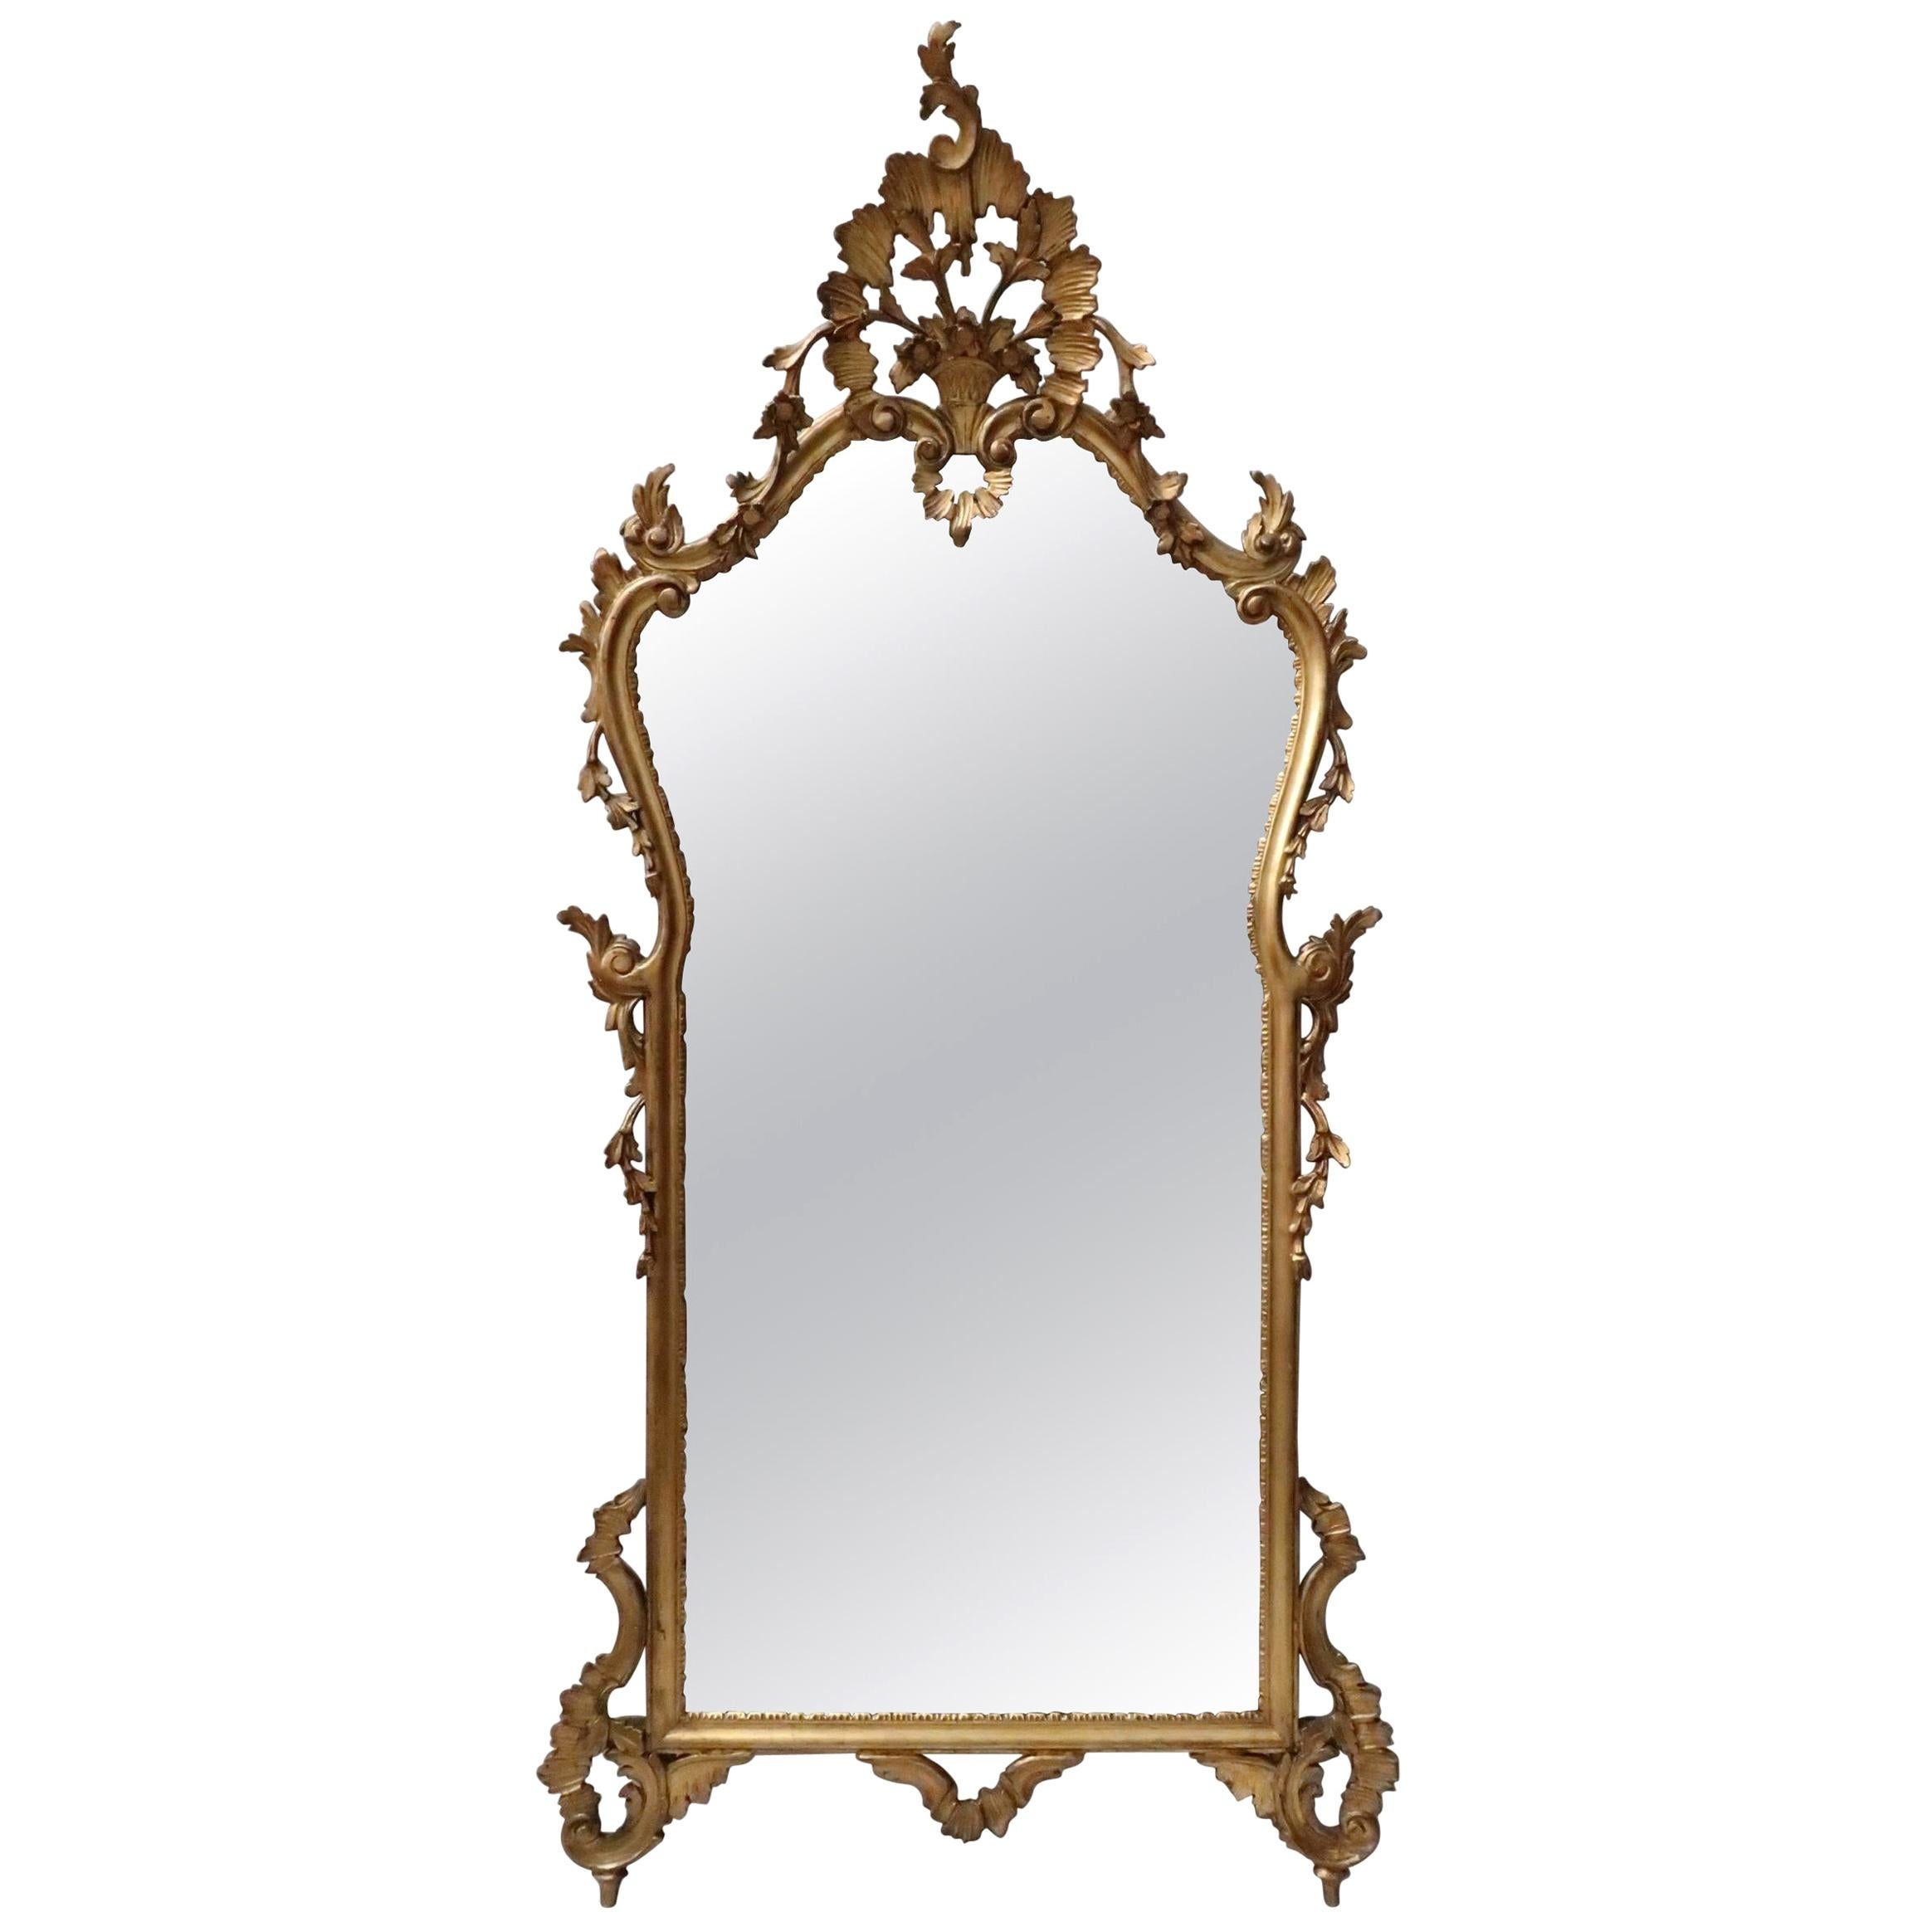 Italian Early 20th Century Carved Giltwood Wall Mirror